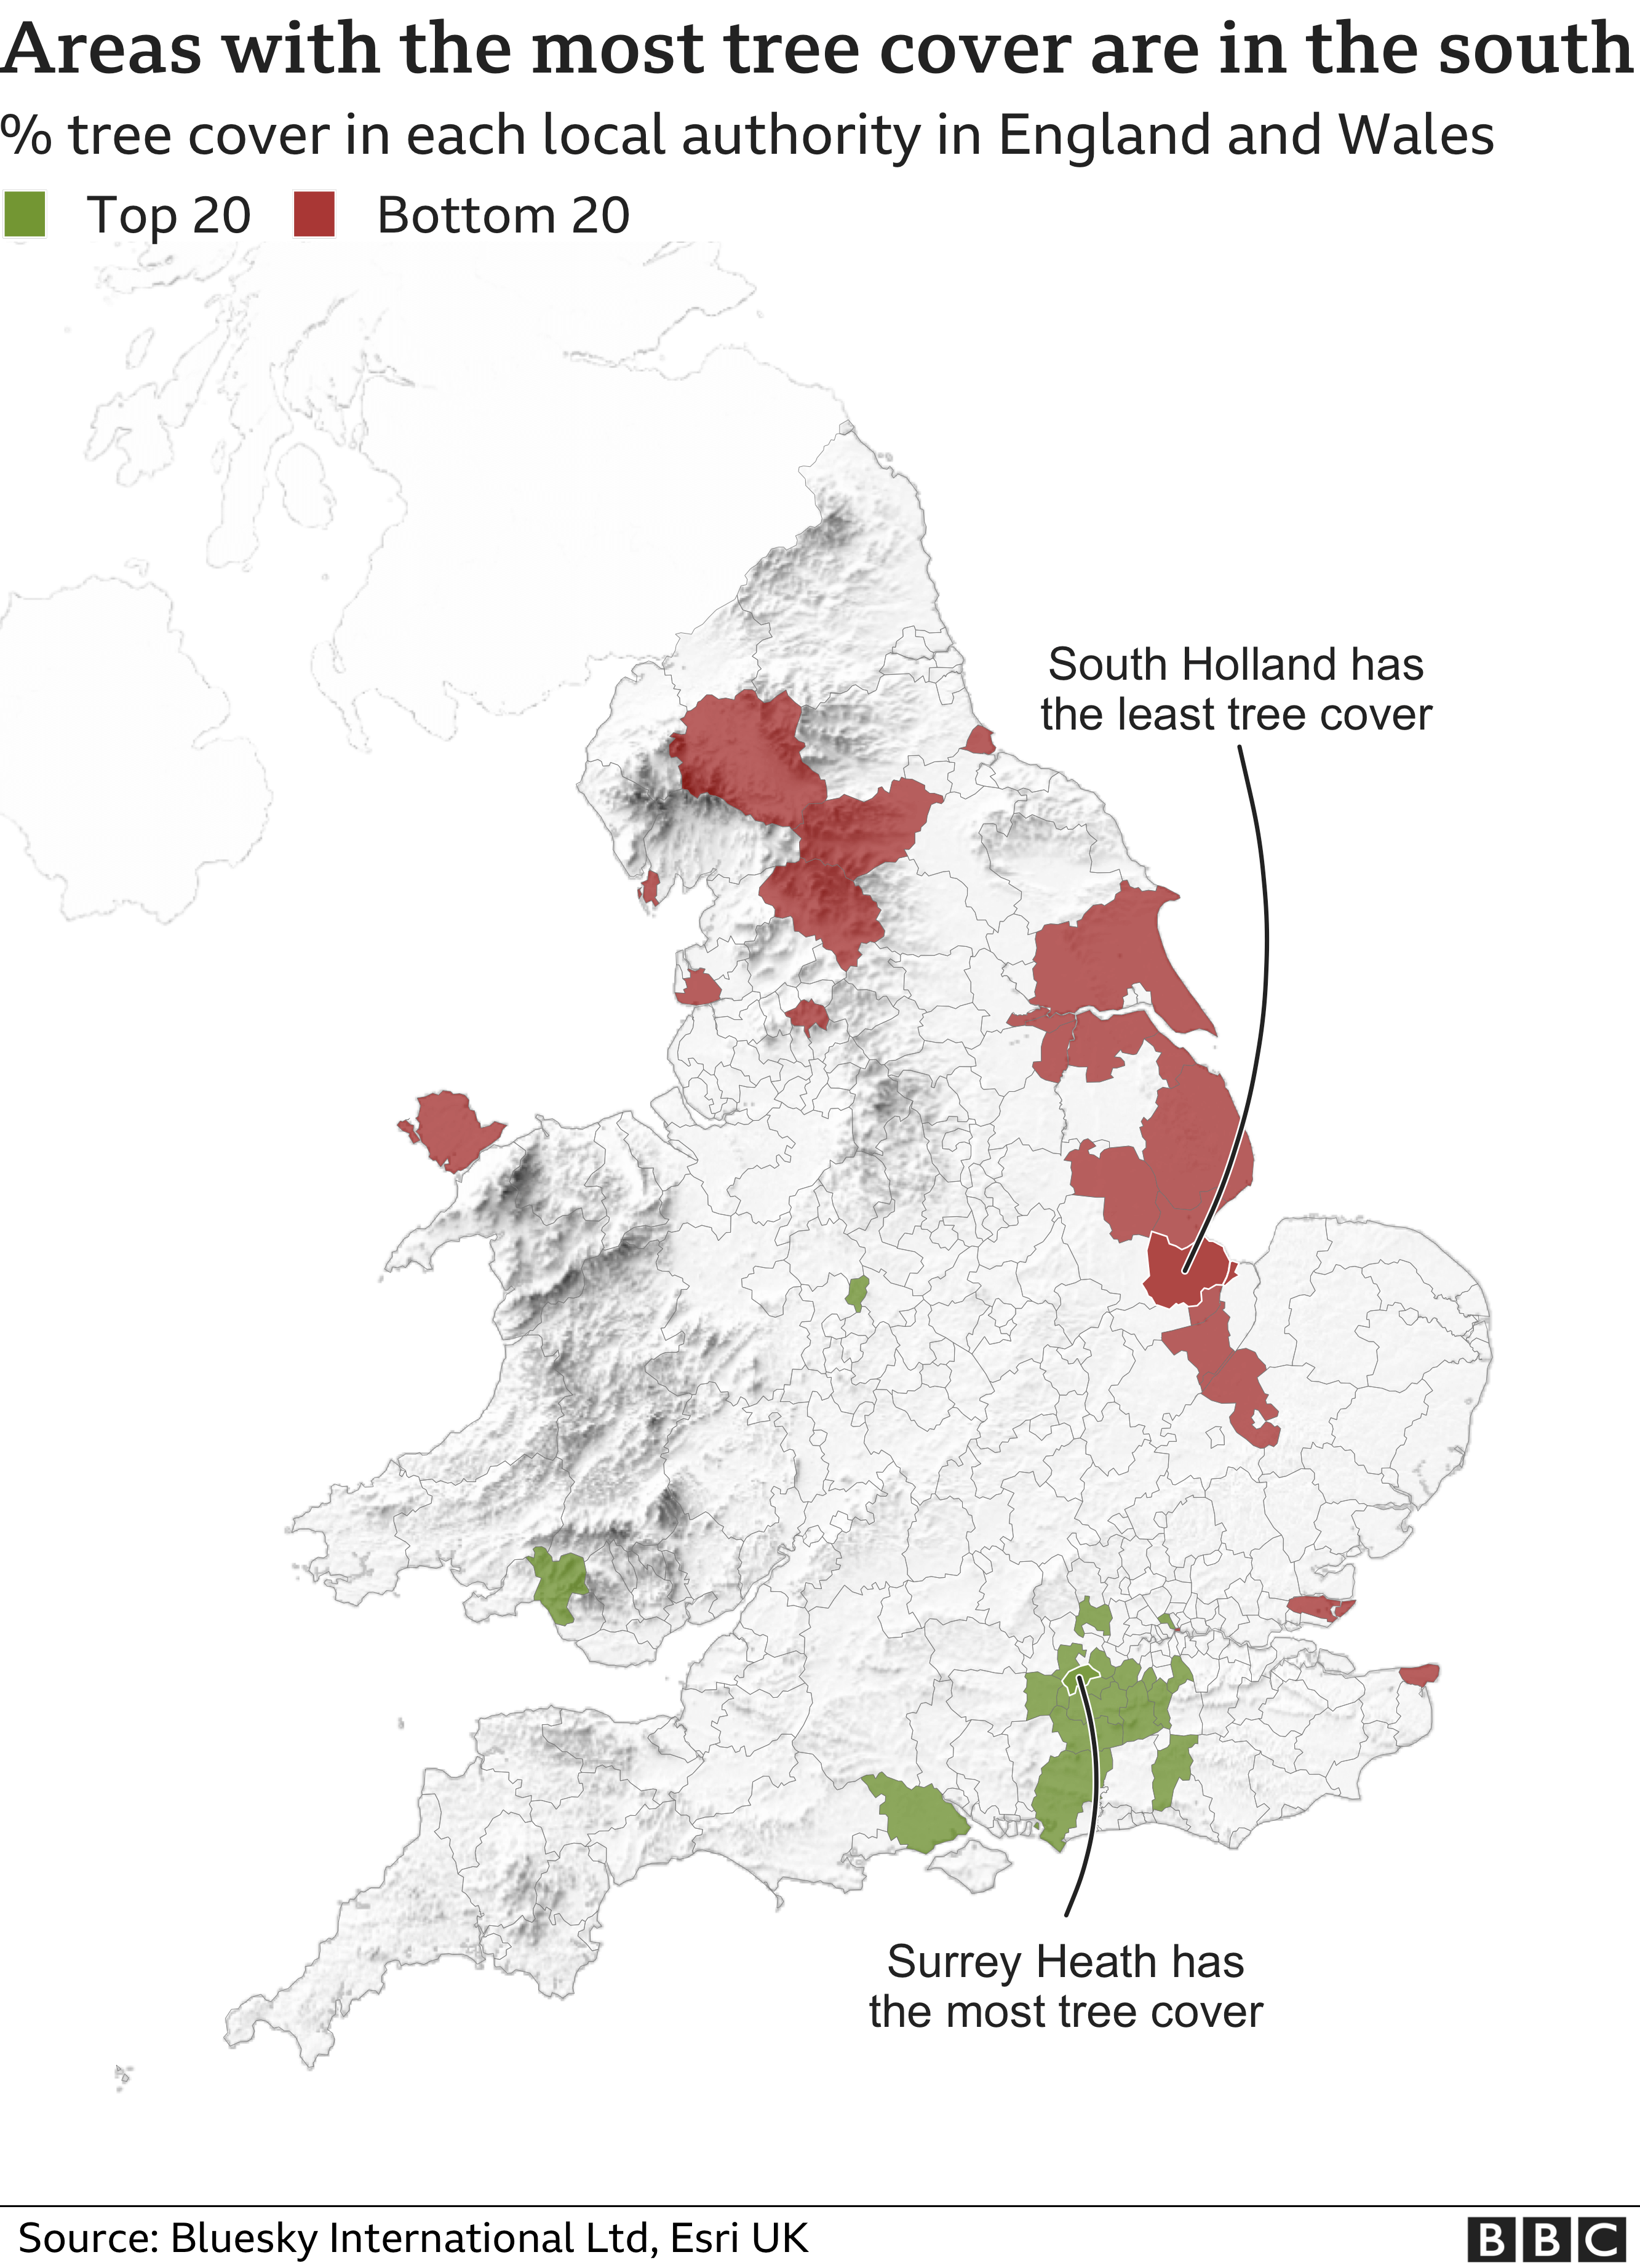 A map of the top and bottom places for tree cover in England and Wales. The places in the bottom 20 are mainly along the east coast. The top 20 places are concentrated in the south east around Surrey.